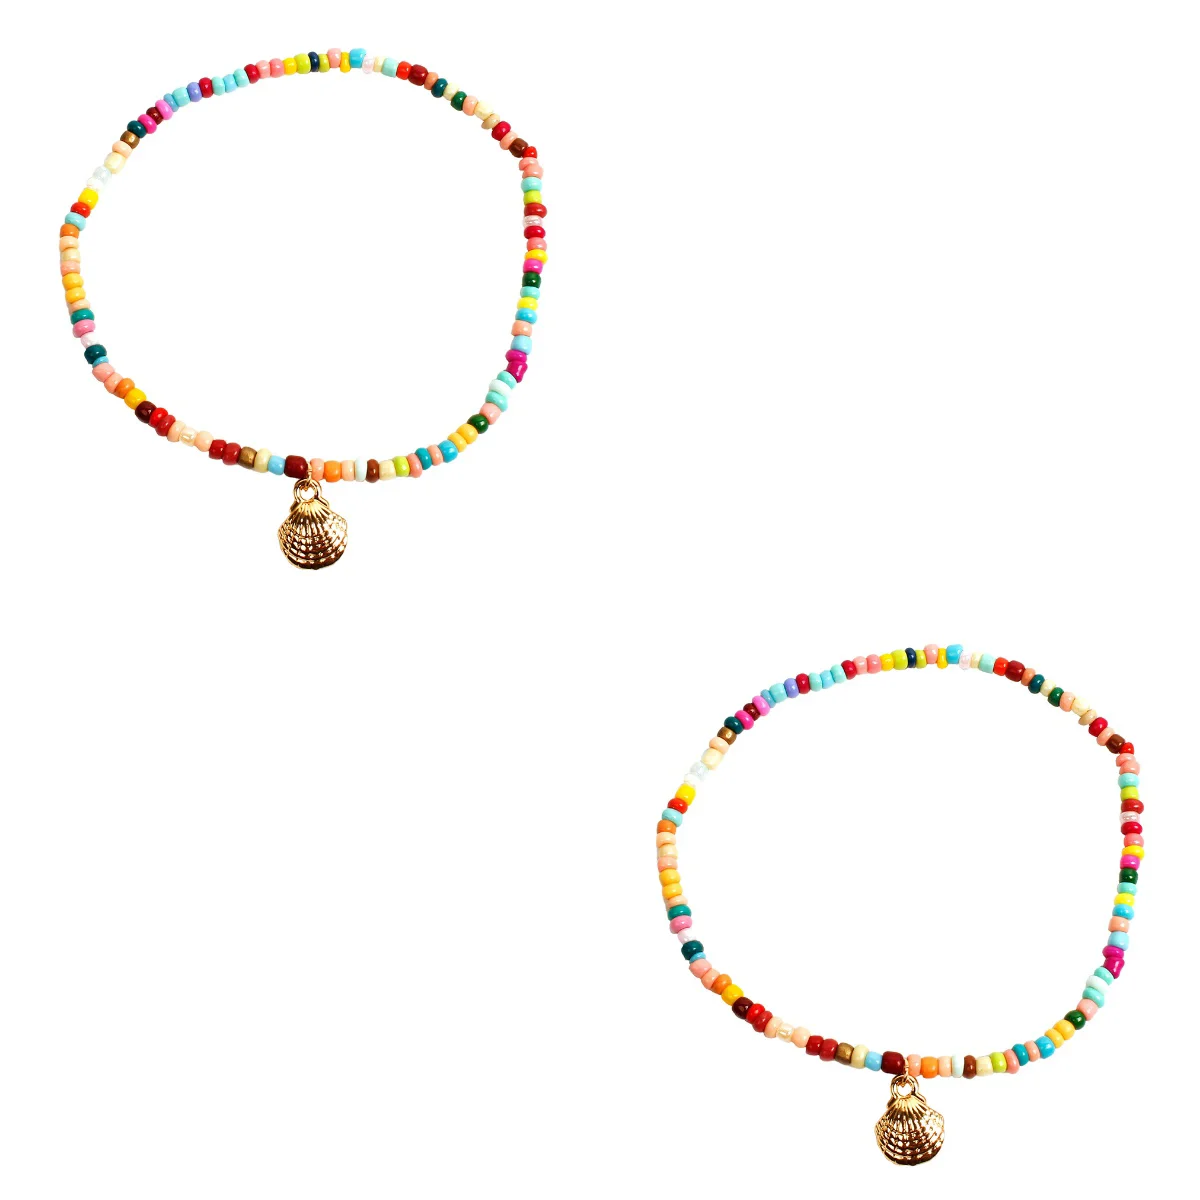 

2x Friendship Anklets Anklet Chain Beach Foot Chain Anklet Rice Beads Colorful Pendant Charm Anklets Rice Beads Anklet